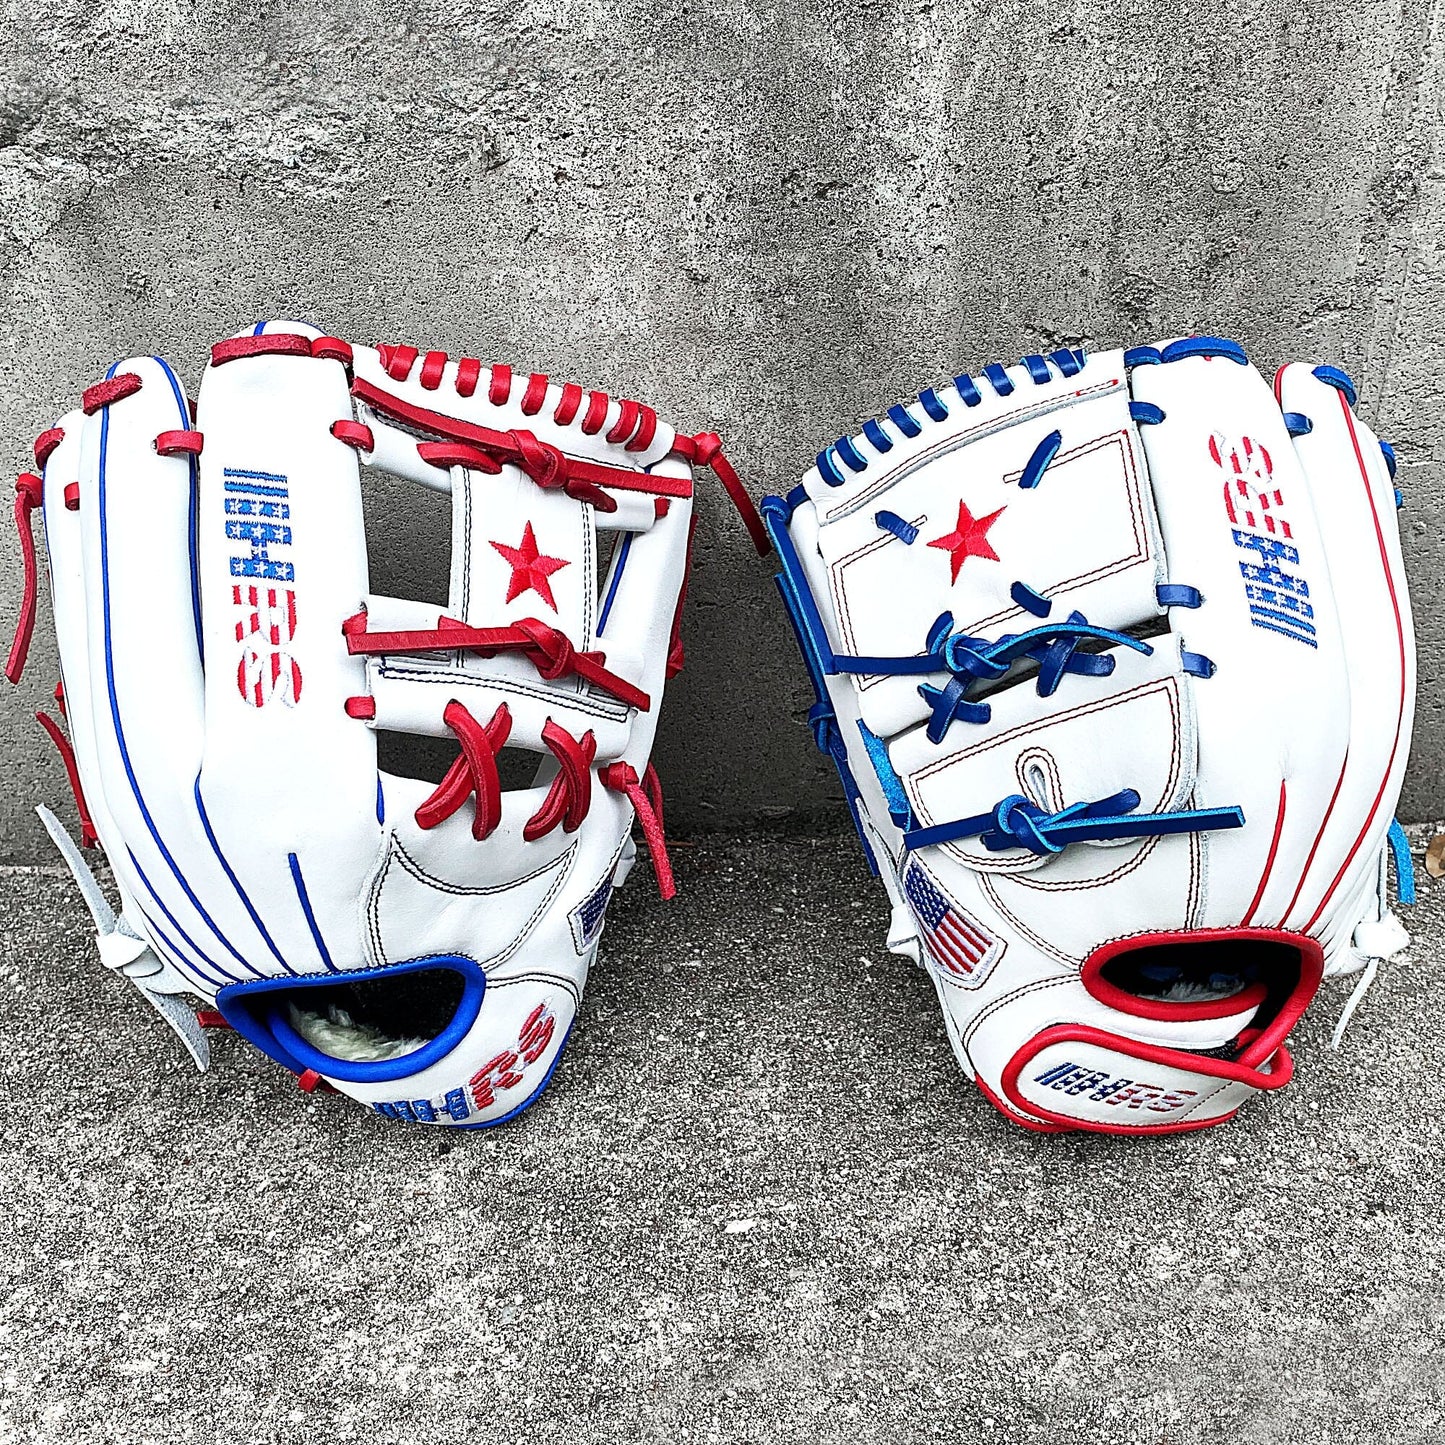 Limited Edition All-American Gloves